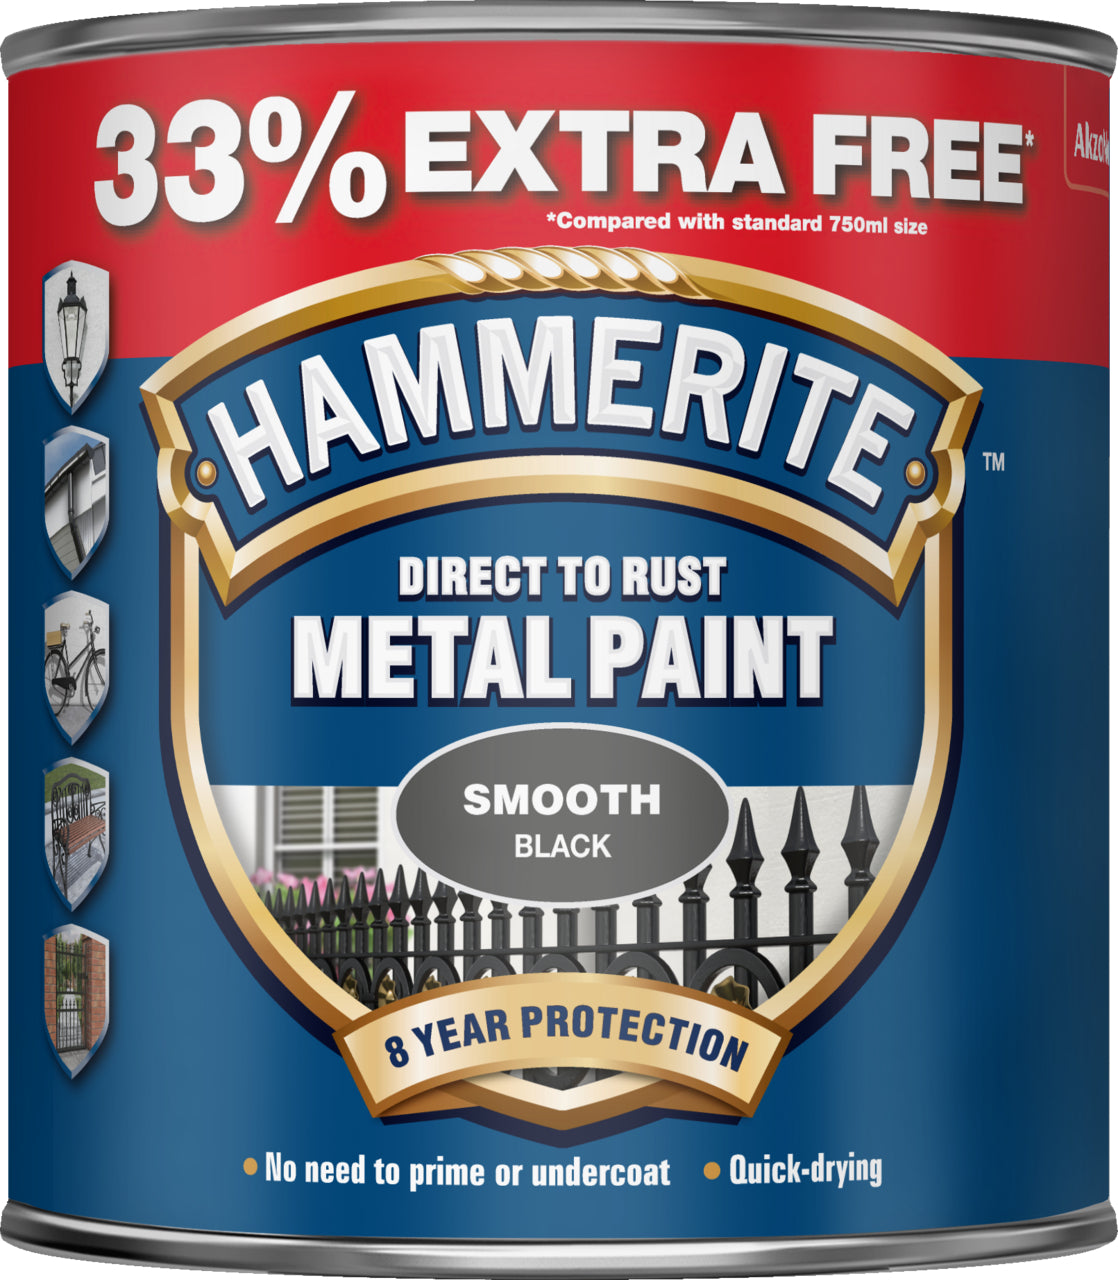 Hammerite Direct To Rust Metal Paint Smooth Finish 1L - Black/Silver